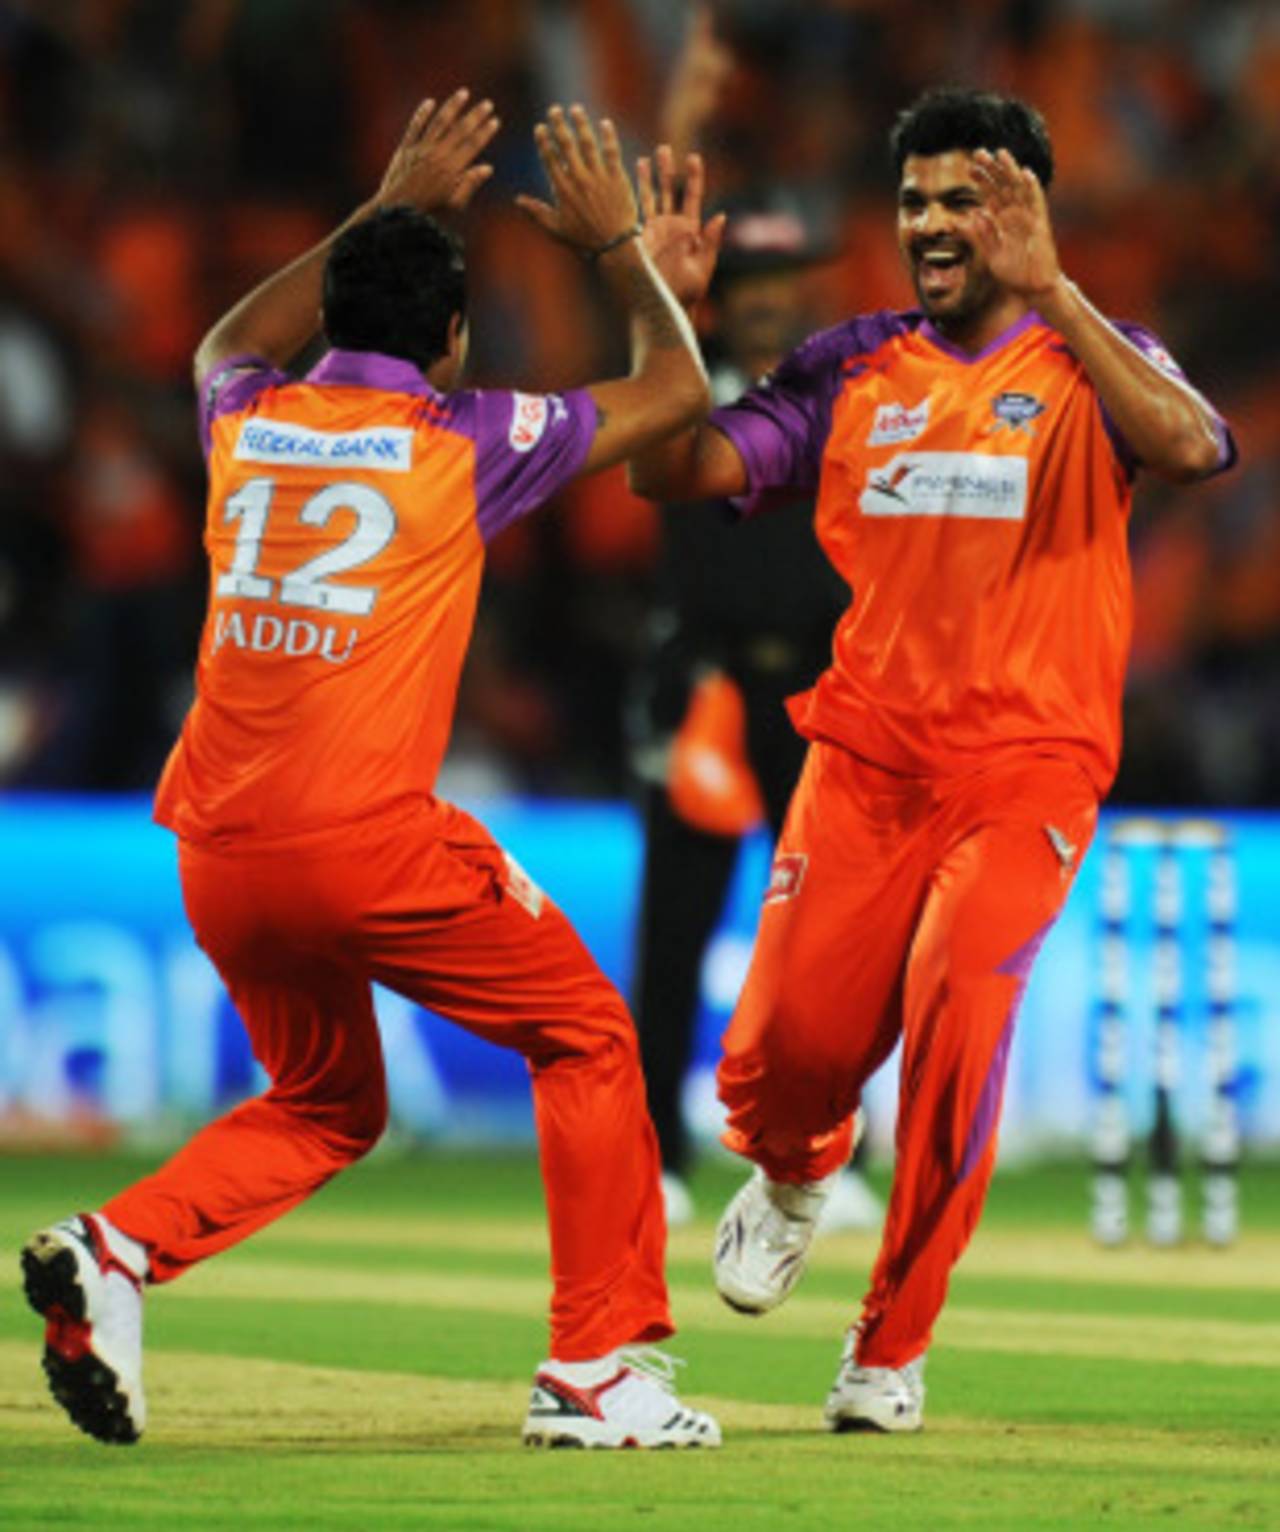 RP Singh, the highest wicket-taker in IPLs, celebrated his first scalp of this edition&nbsp;&nbsp;&bull;&nbsp;&nbsp;AFP